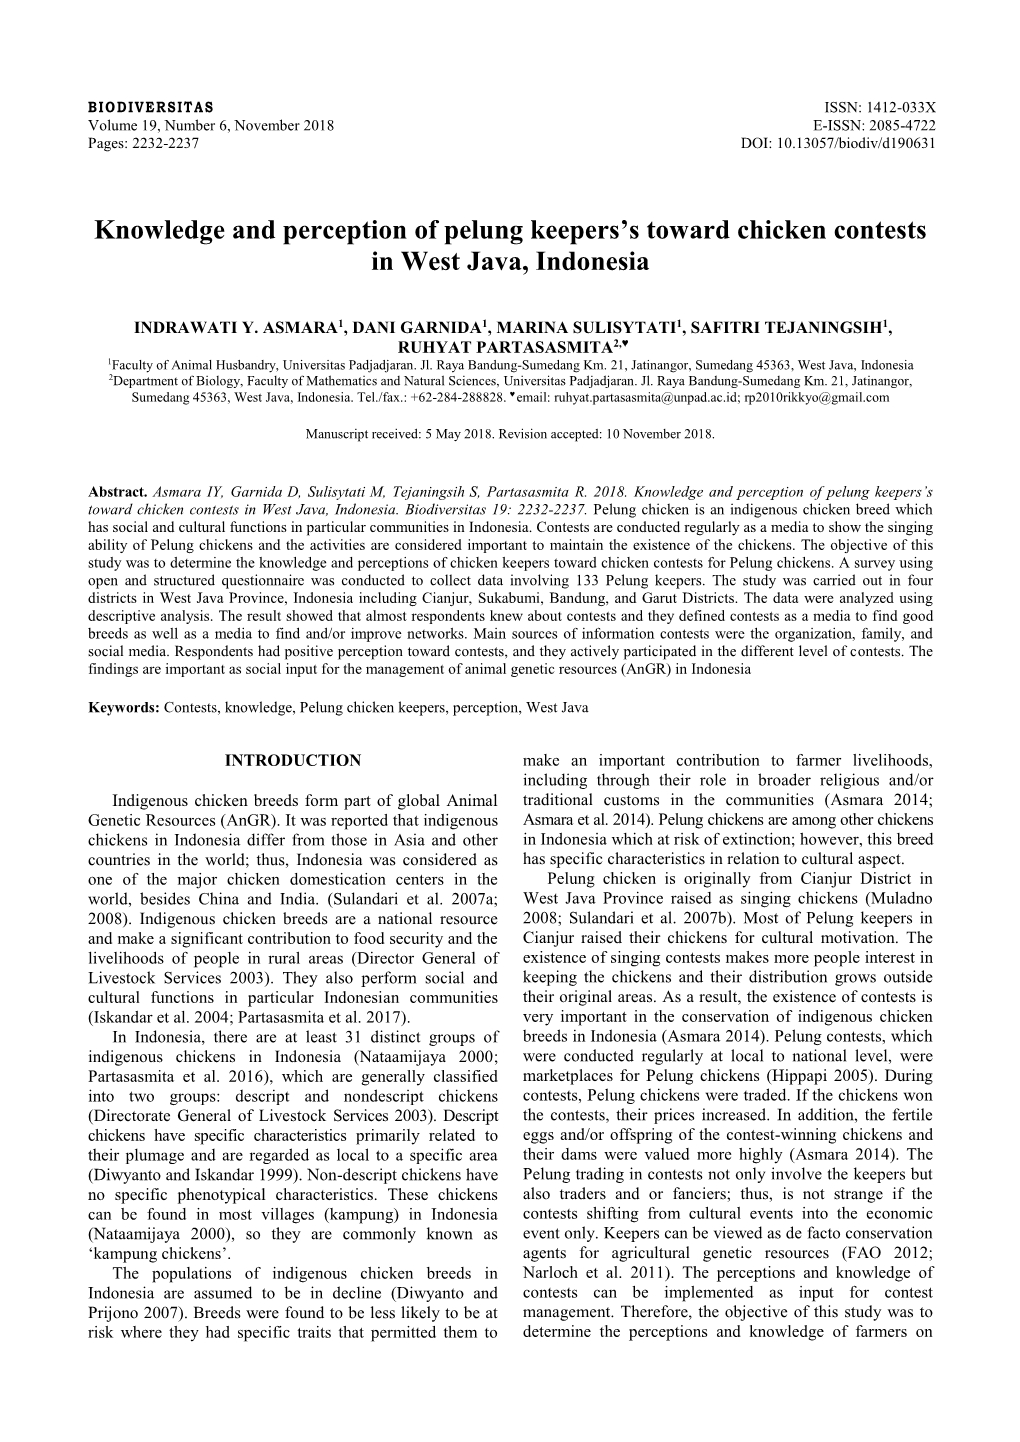 Knowledge and Perception of Pelung Keepers's Toward Chicken Contests in West Java, Indonesia